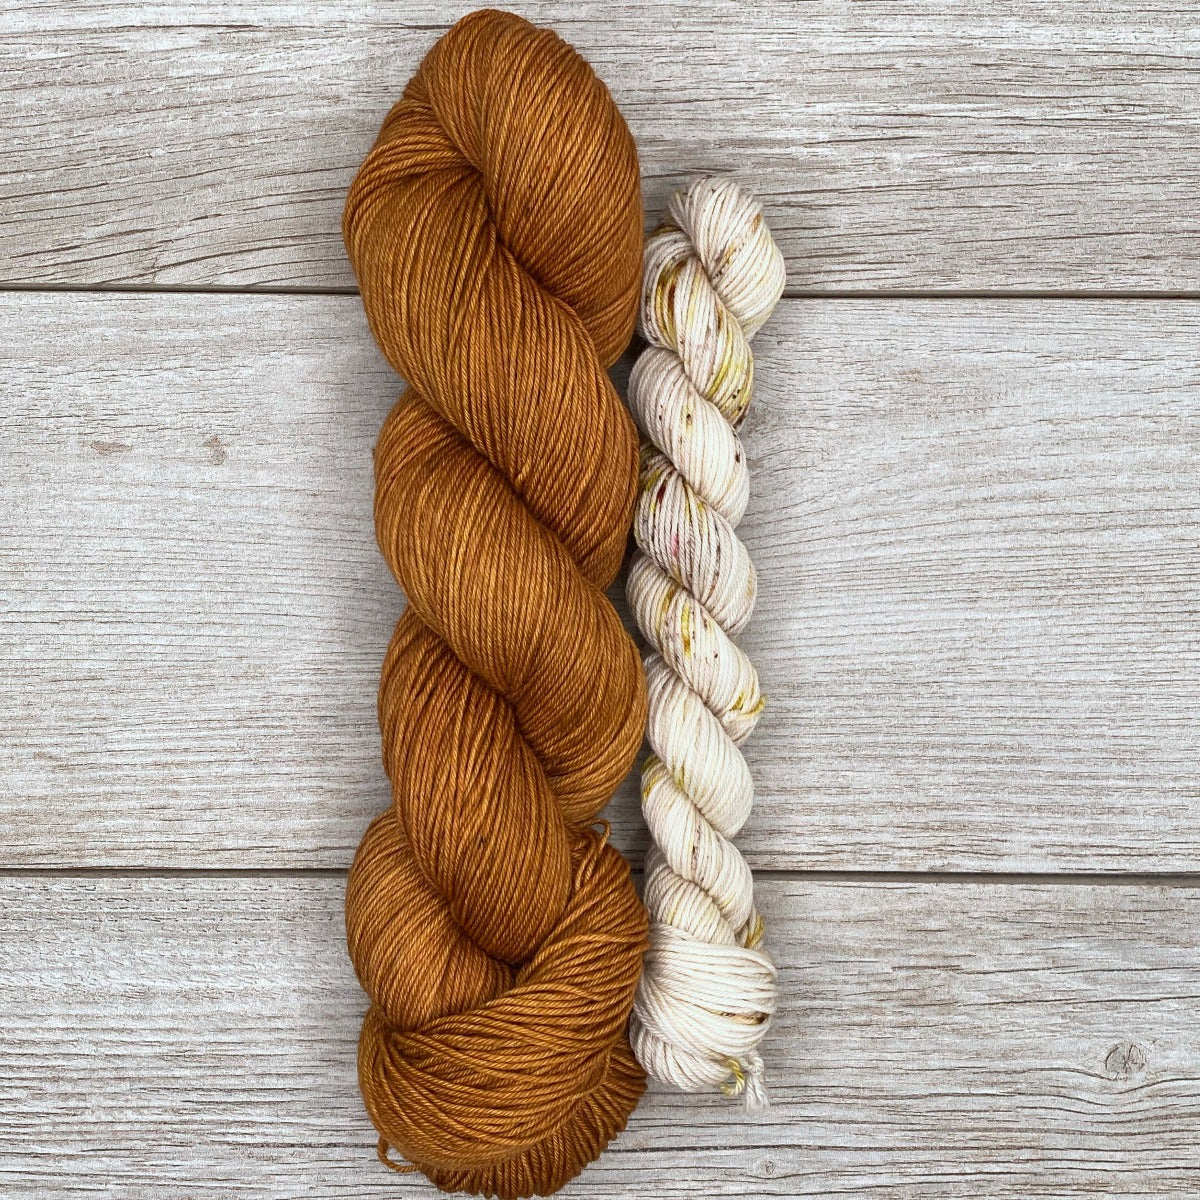 Toffee and Cream SOCK SET  |  SHEEPISHsock  |  fingering weight